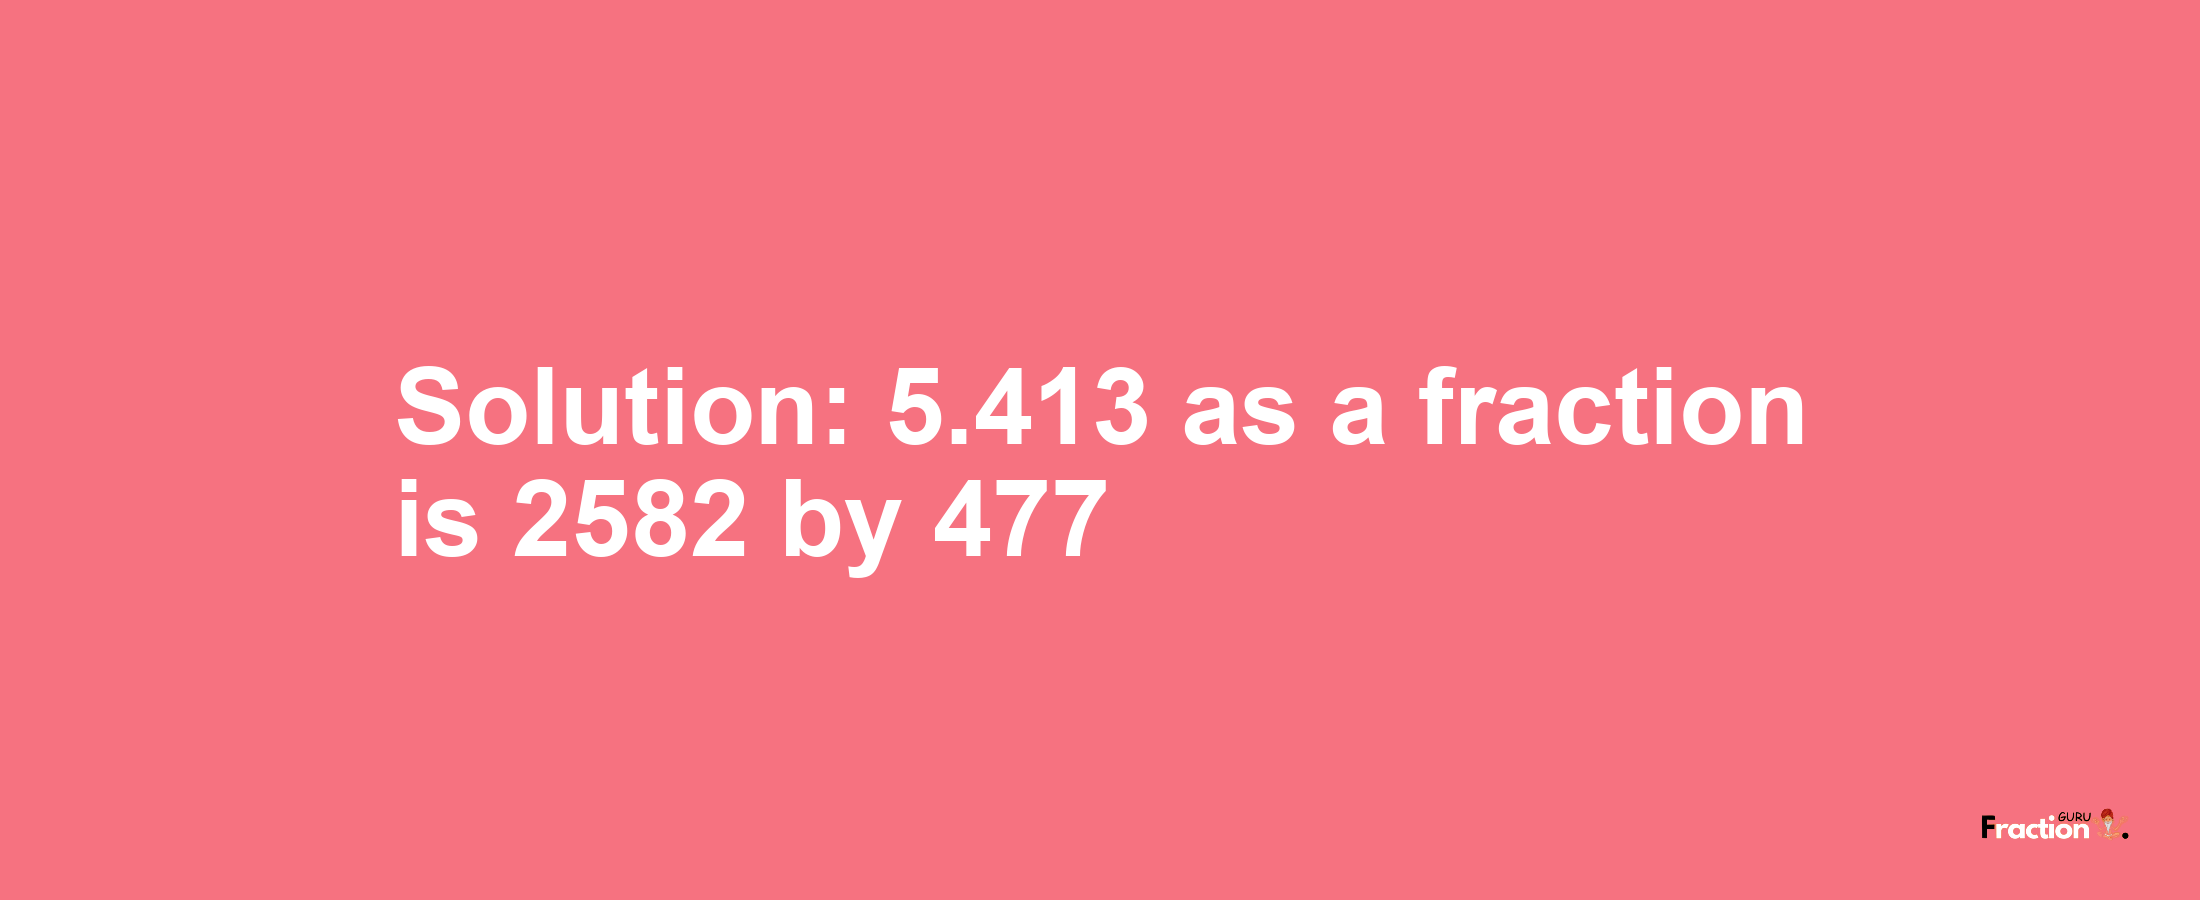 Solution:5.413 as a fraction is 2582/477